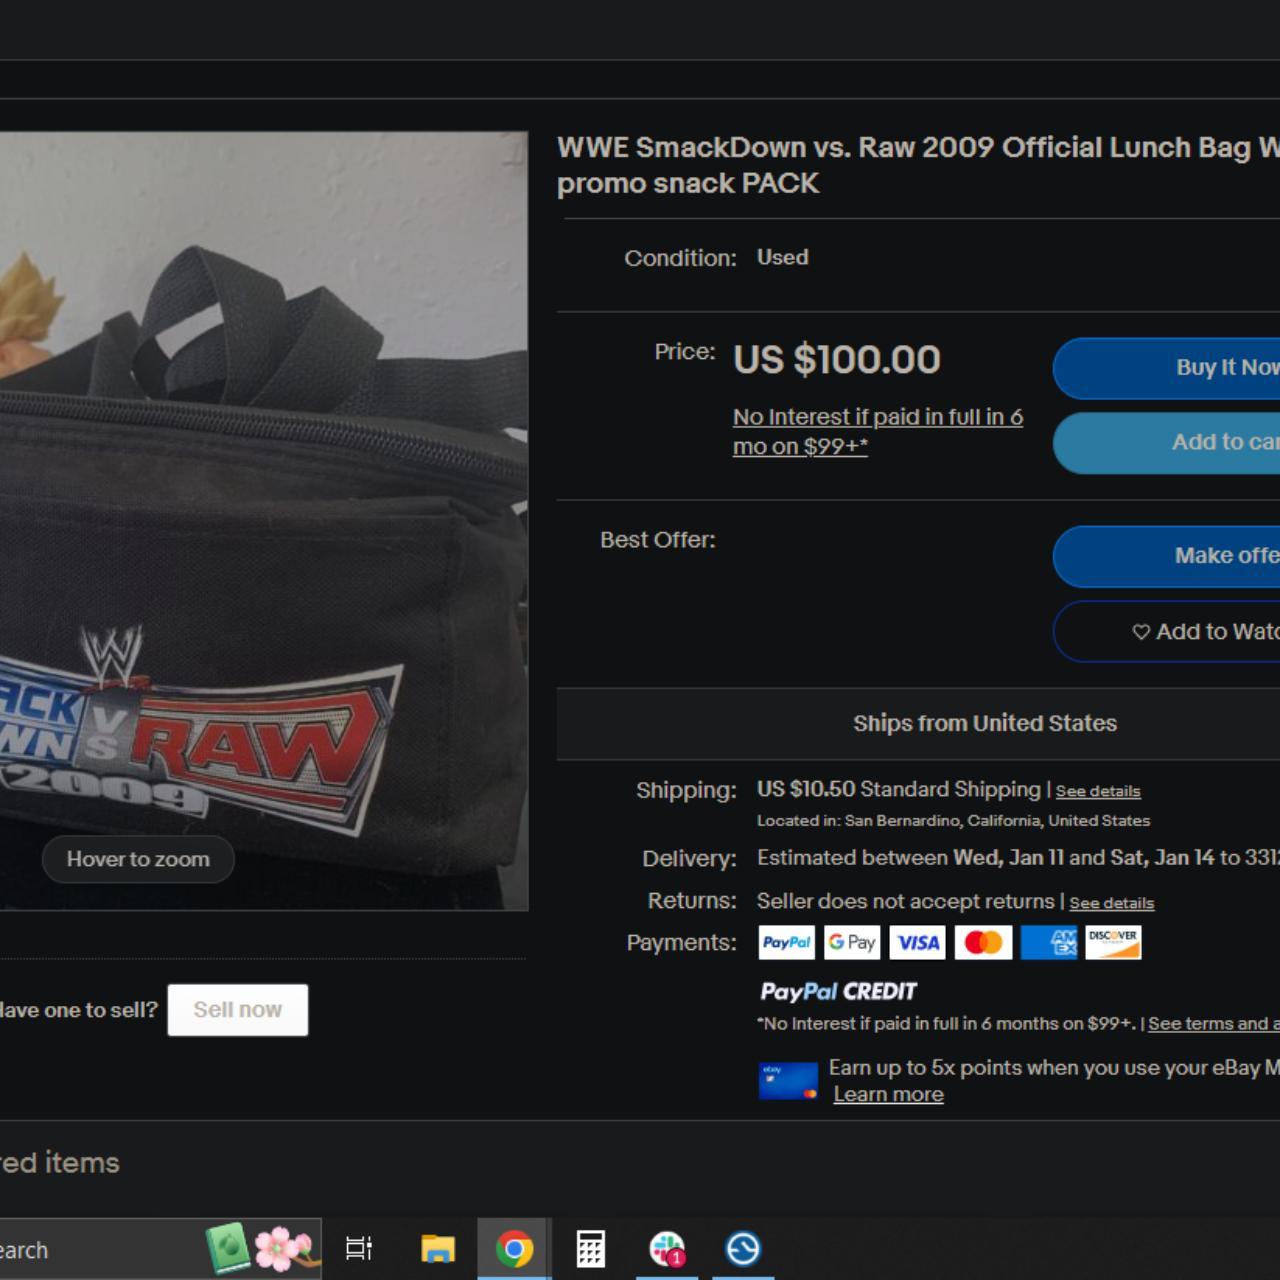 WWE SmackDown vs. Raw 2009 Official Lunch Bag - Depop